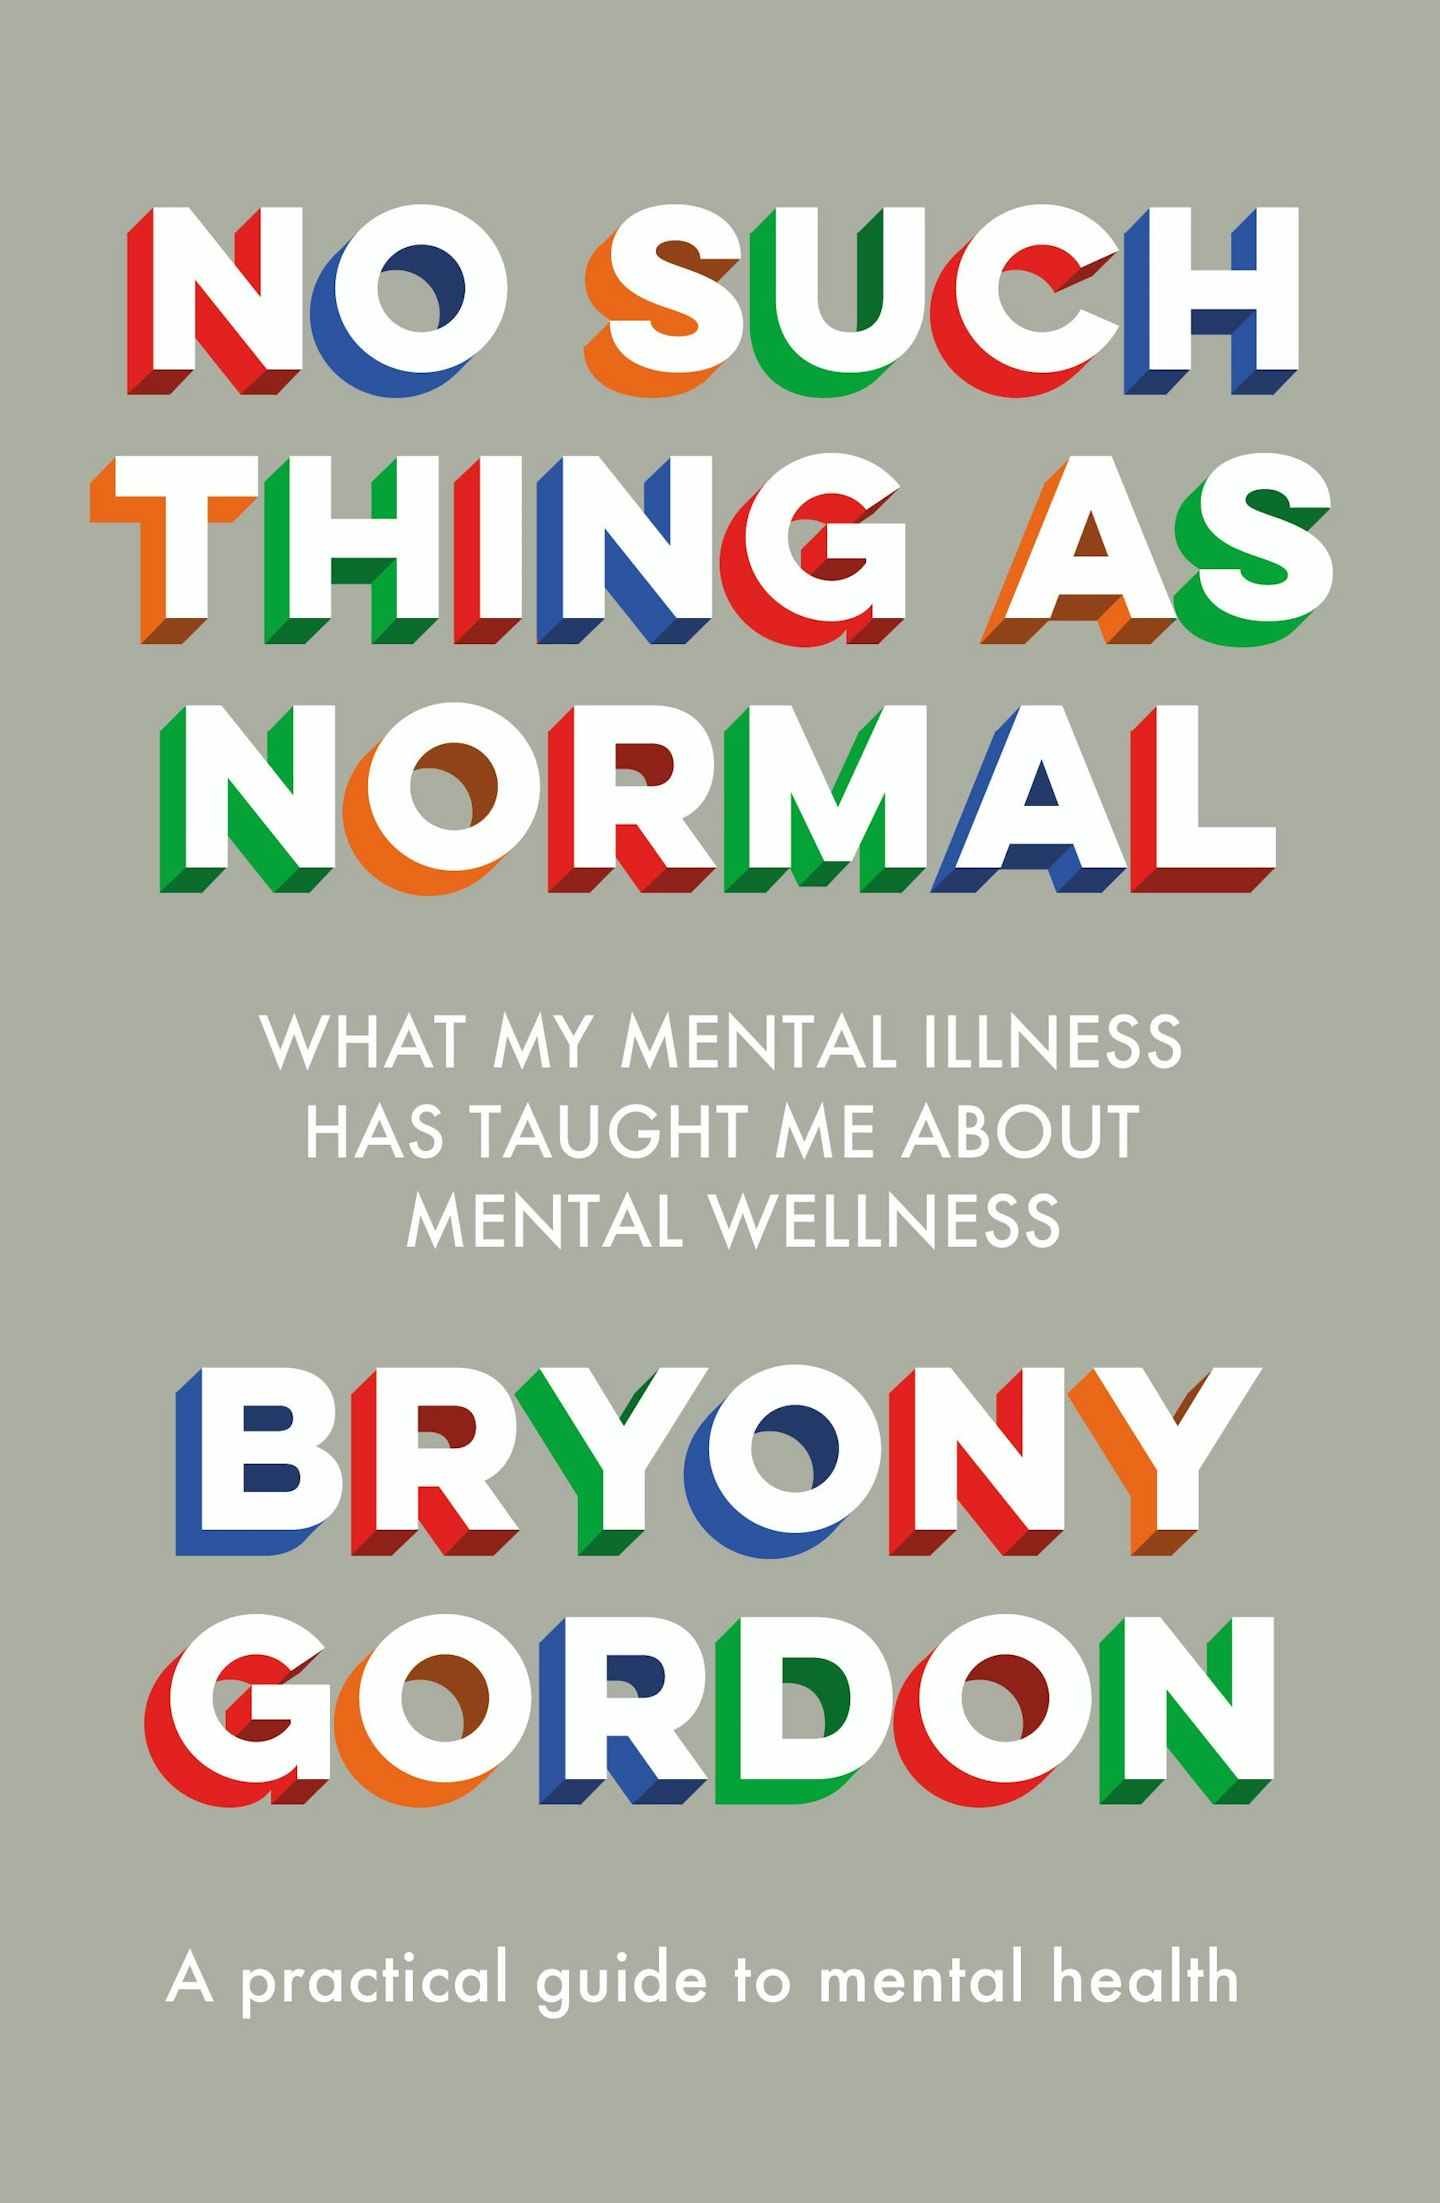 No Such Thing as Normal: What my mental illness has taught me about mental wellness, by Bryony Gordon